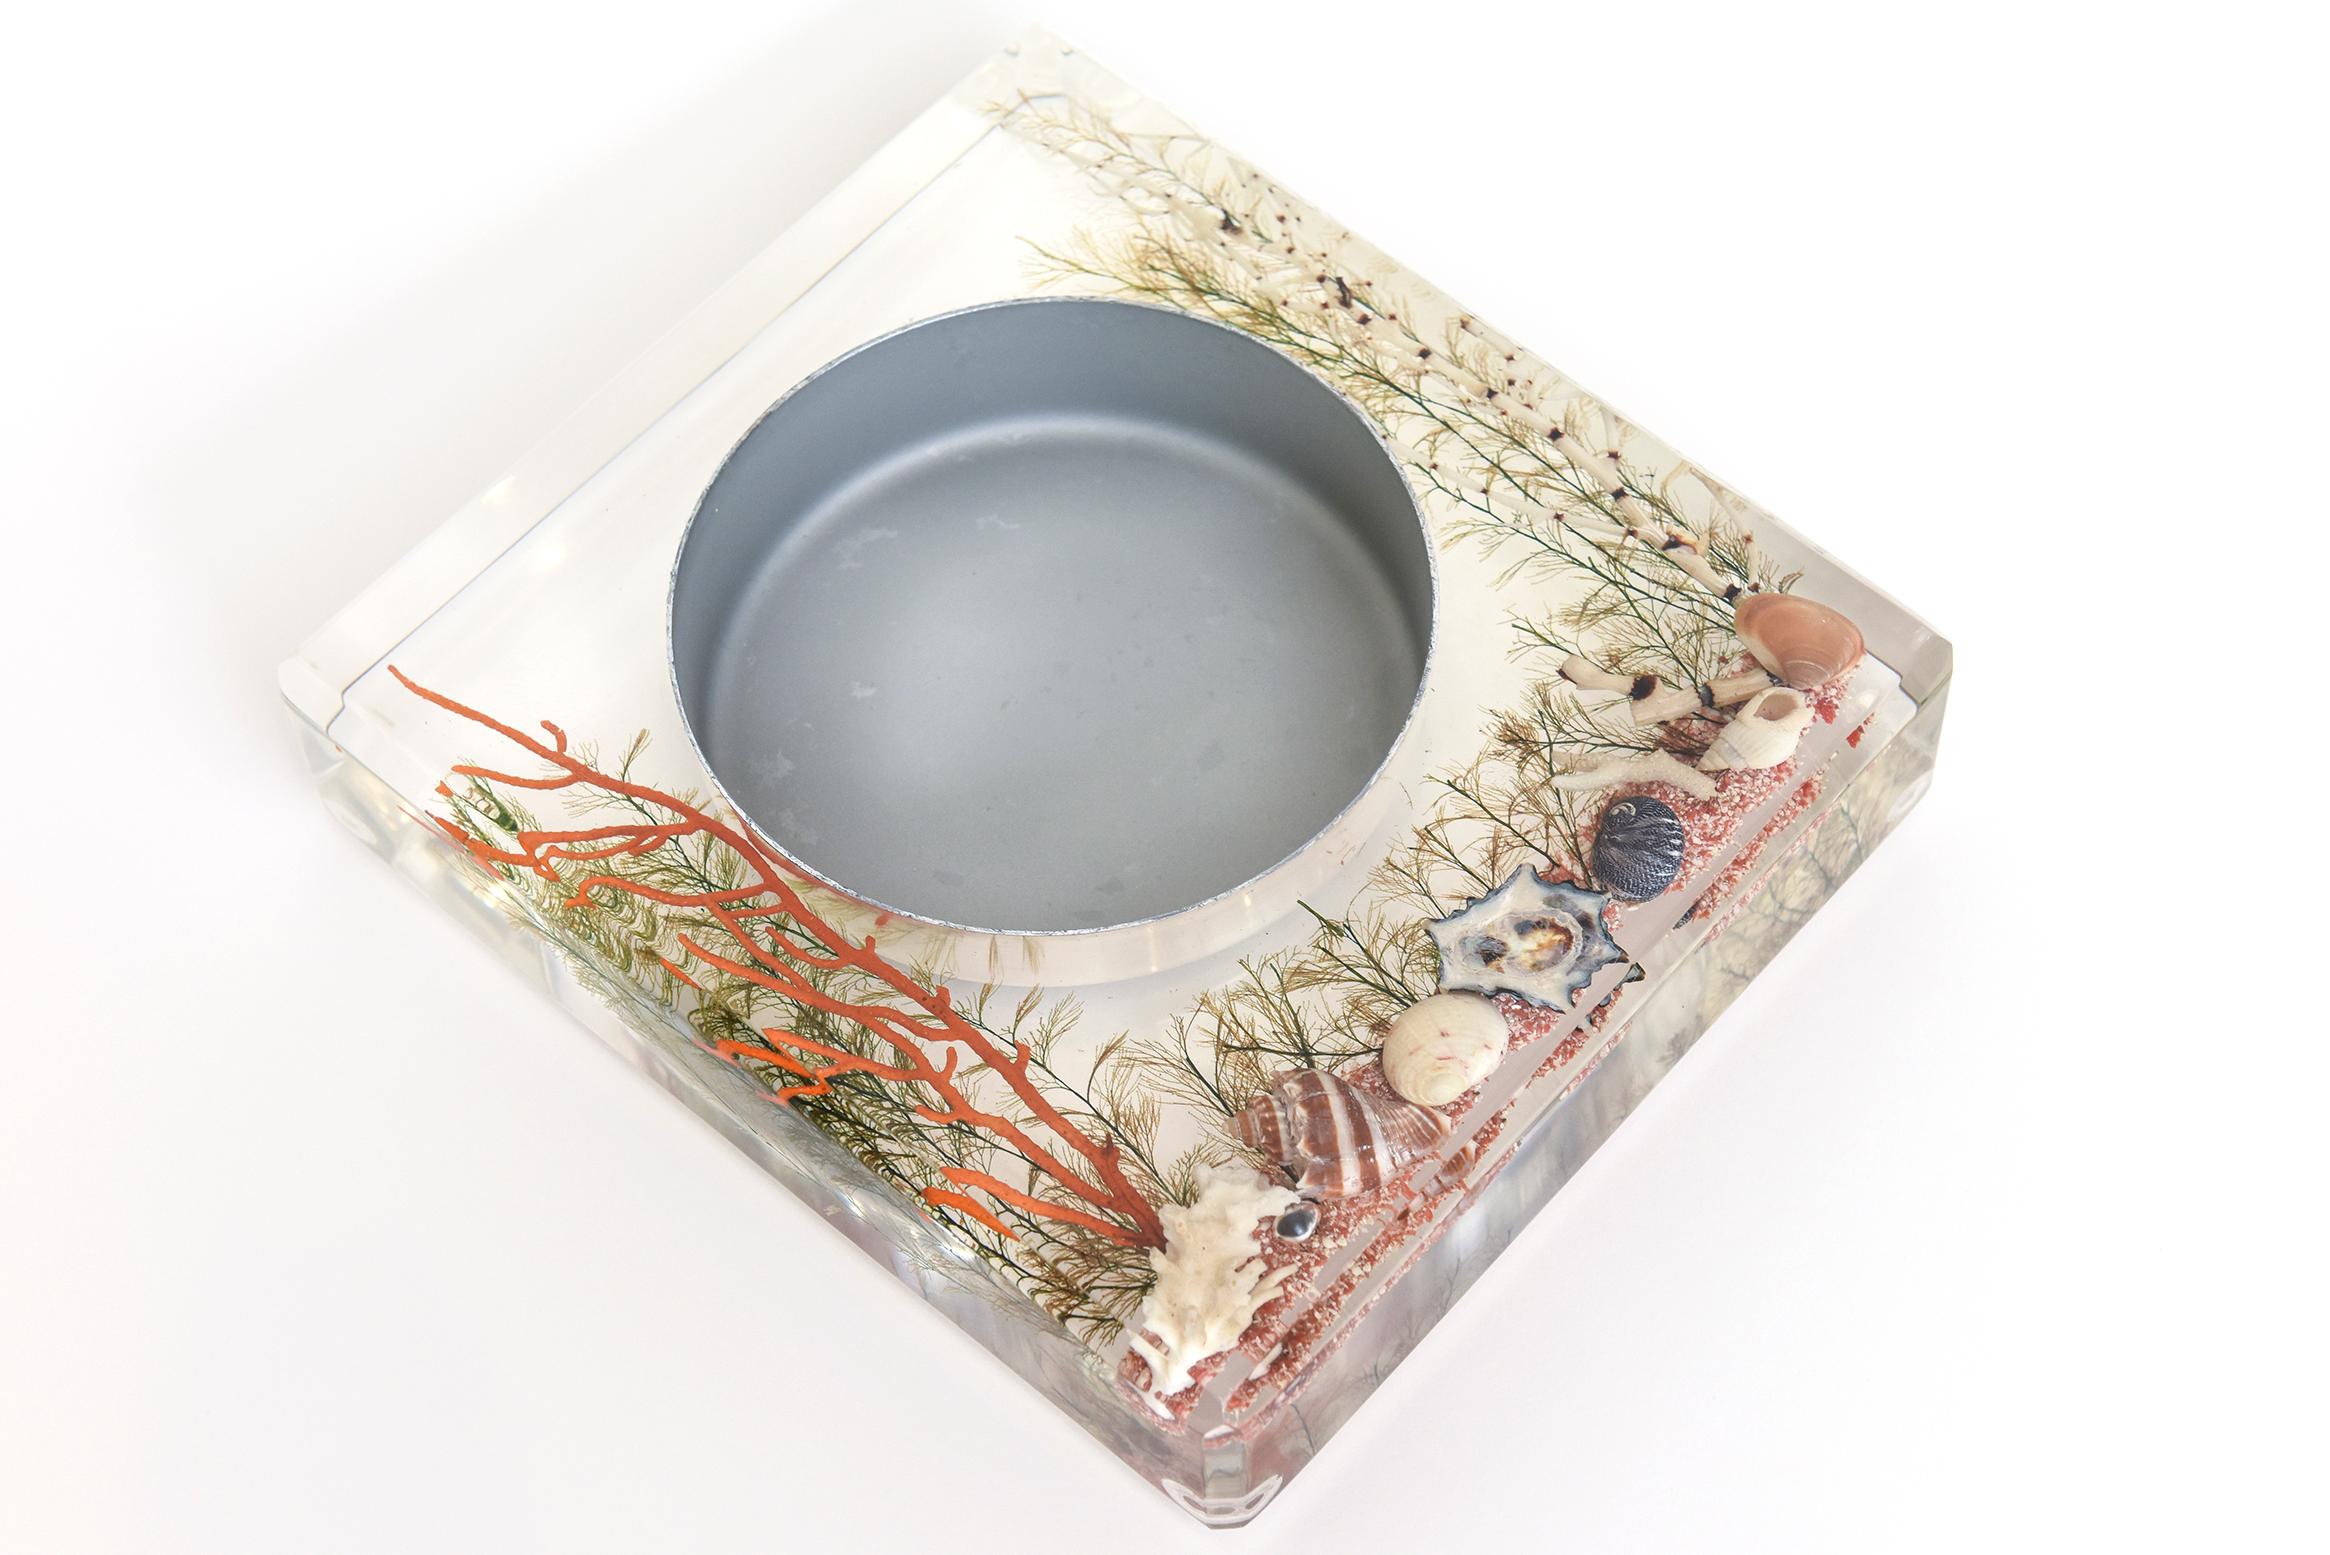 This fun, nautical and very Palm Beach lucite embedded bowl has a center of polished aluminum. The interior are assorted colored shells, resin coral, colored orange sand, and dried plants. Vintage from the 70's. Makes a great desk accessory or soap